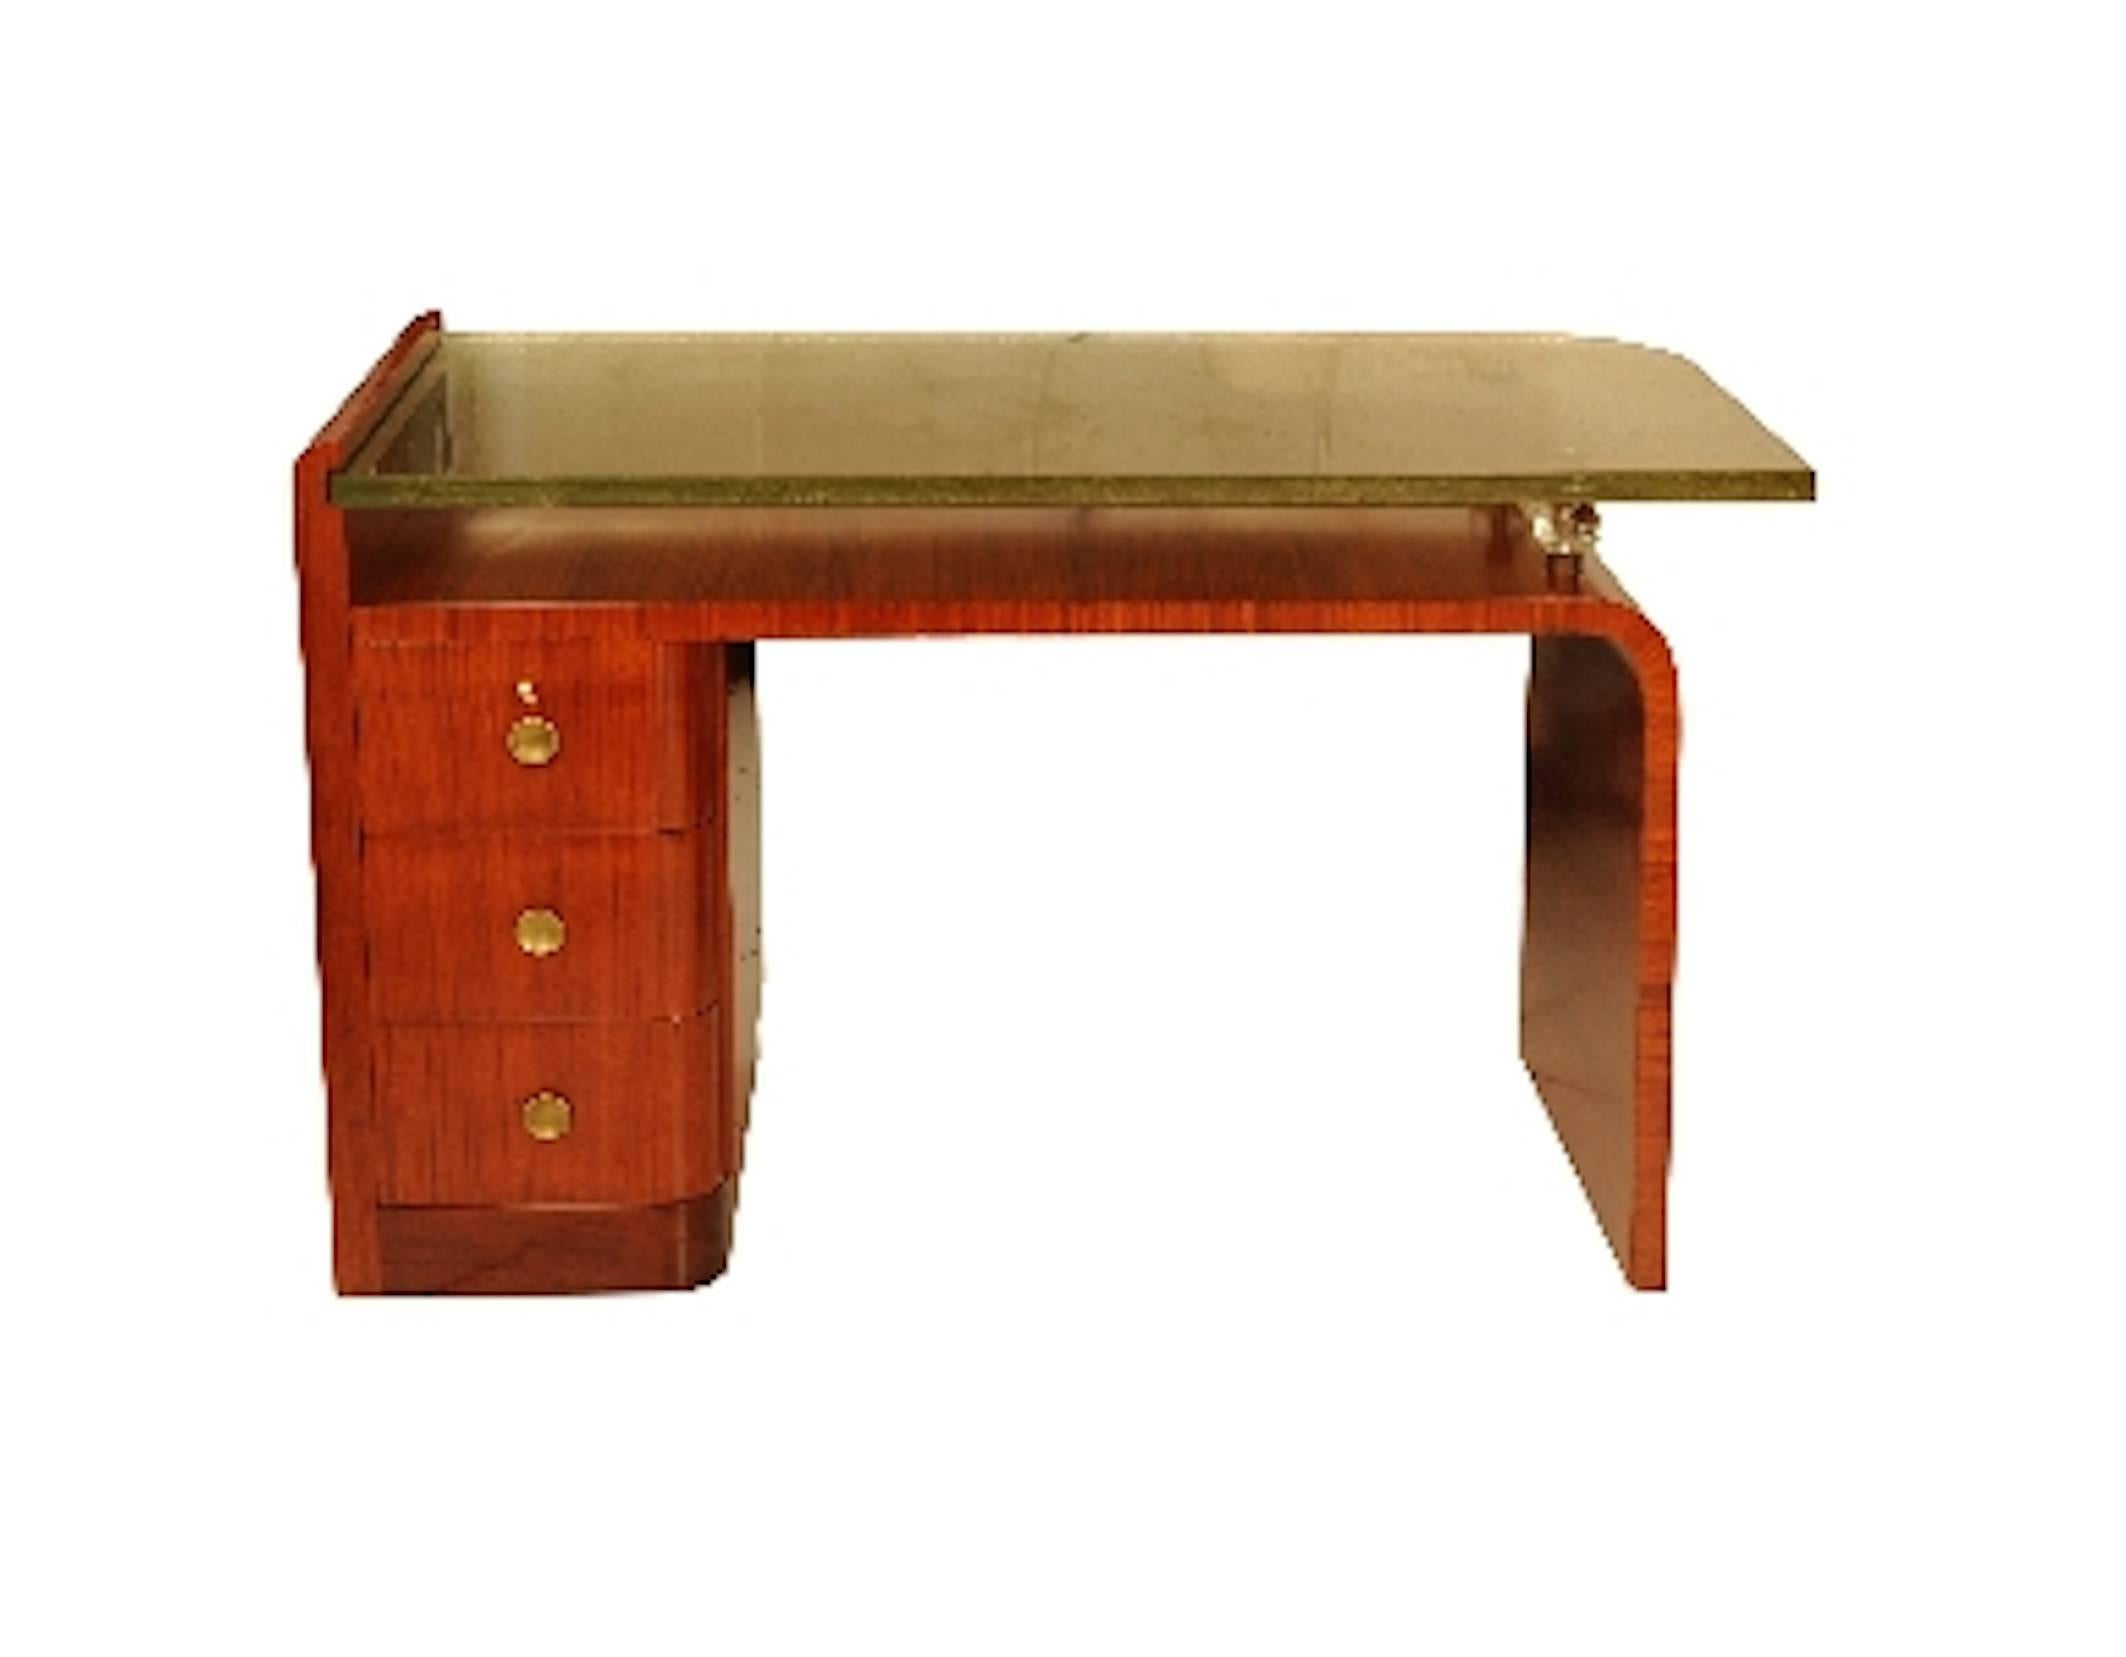 Rare Desk by Jacques Adnet. Tray and swivel shelf in thick Saint Gobain glass (sand bed), original.
Three drawers in front,
circa 1930.
In a perfect condition.